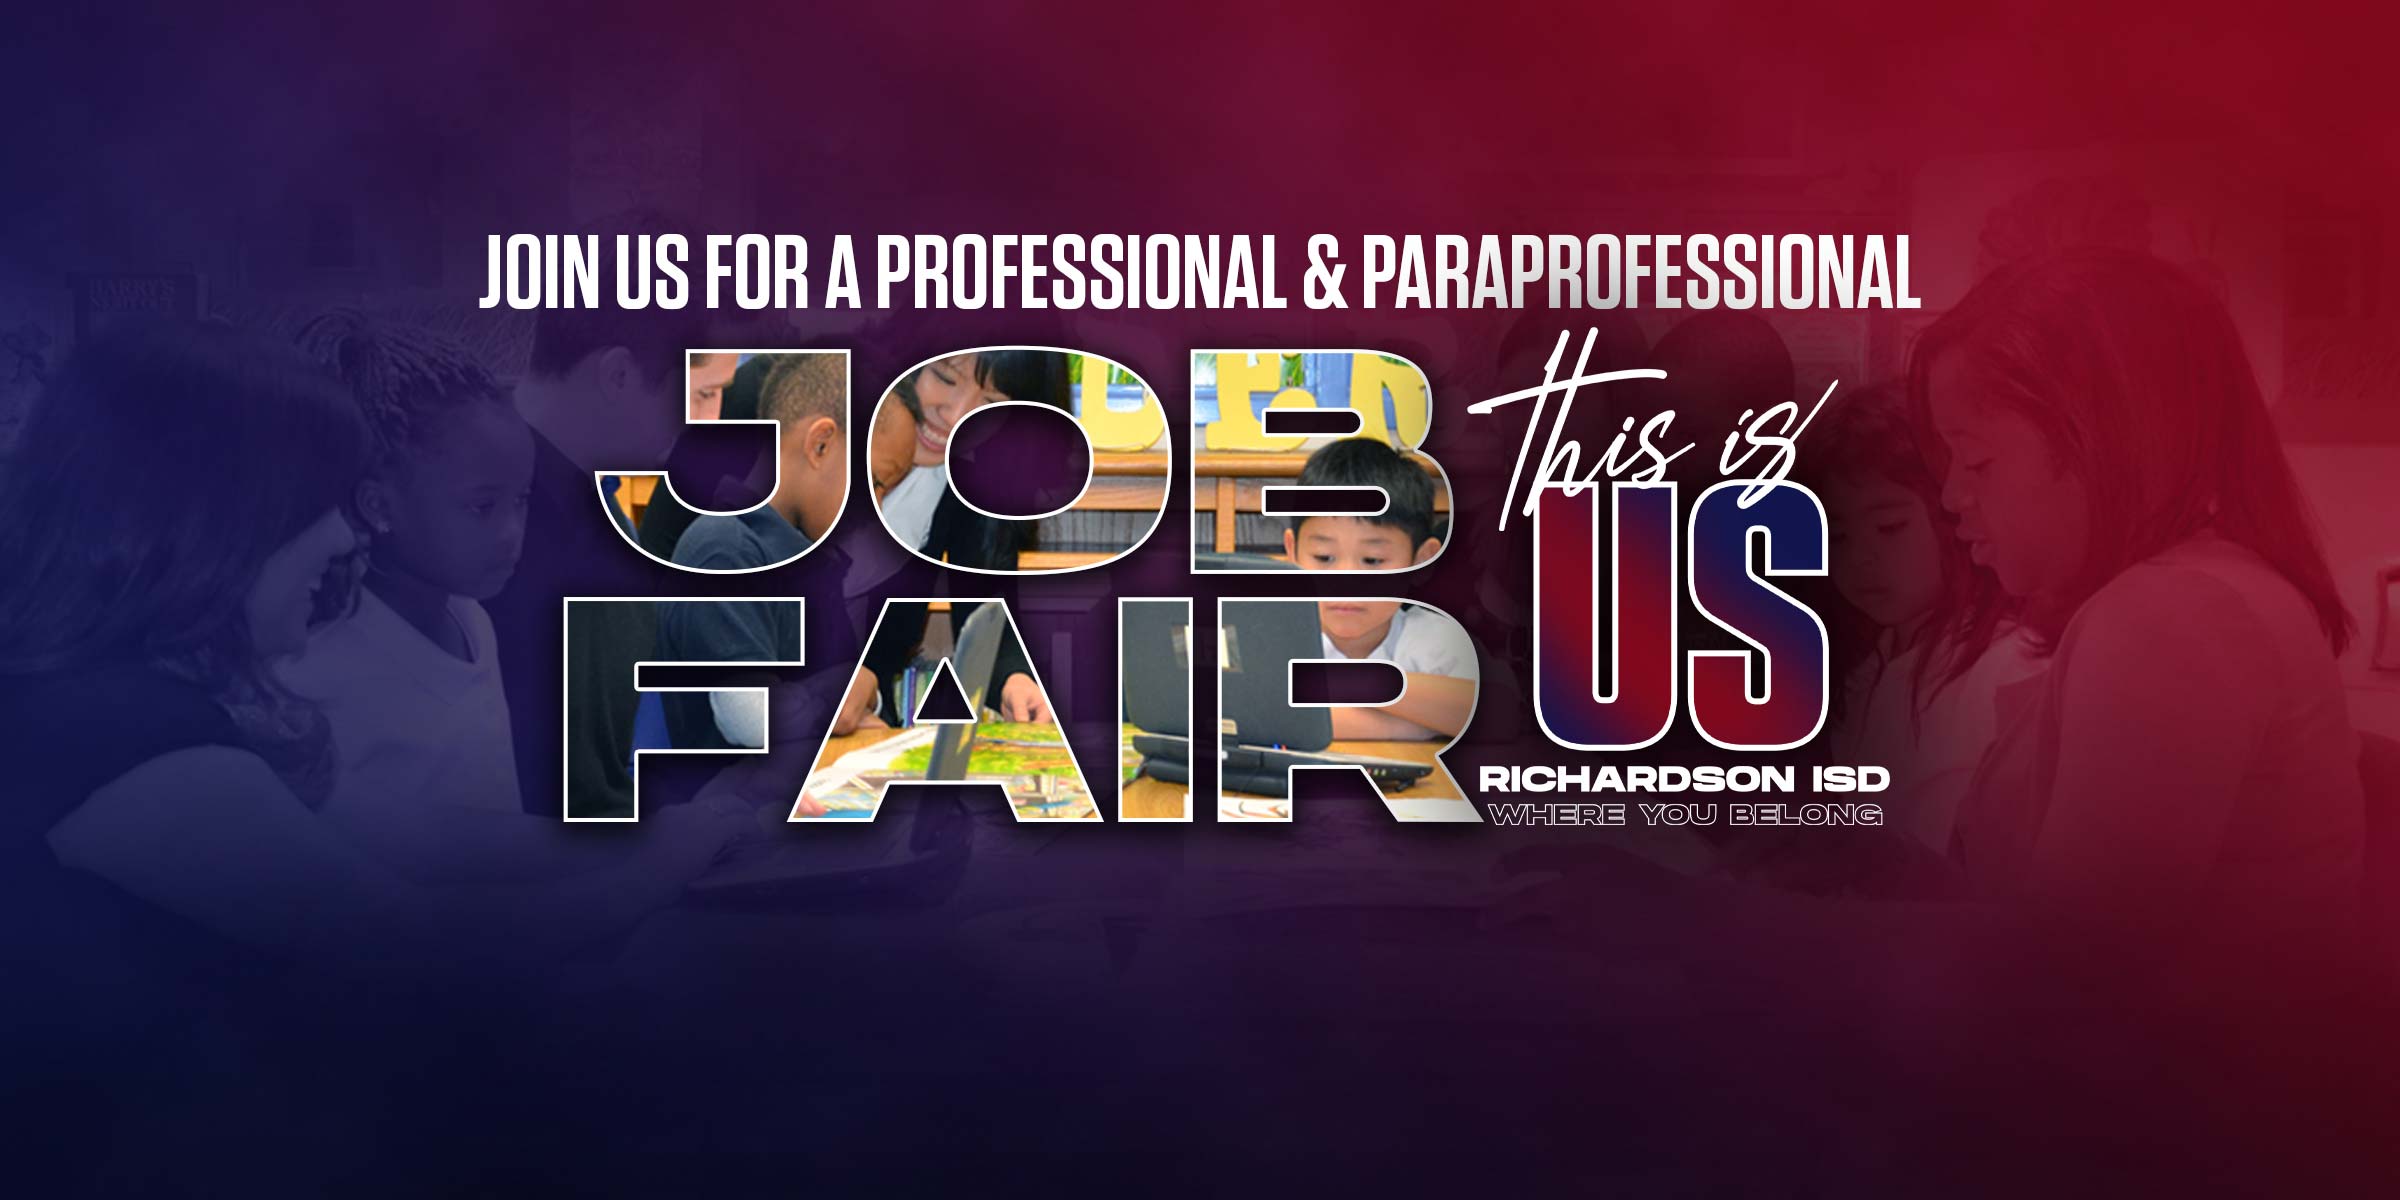 Join us for a professional and paraprofessional job fair.